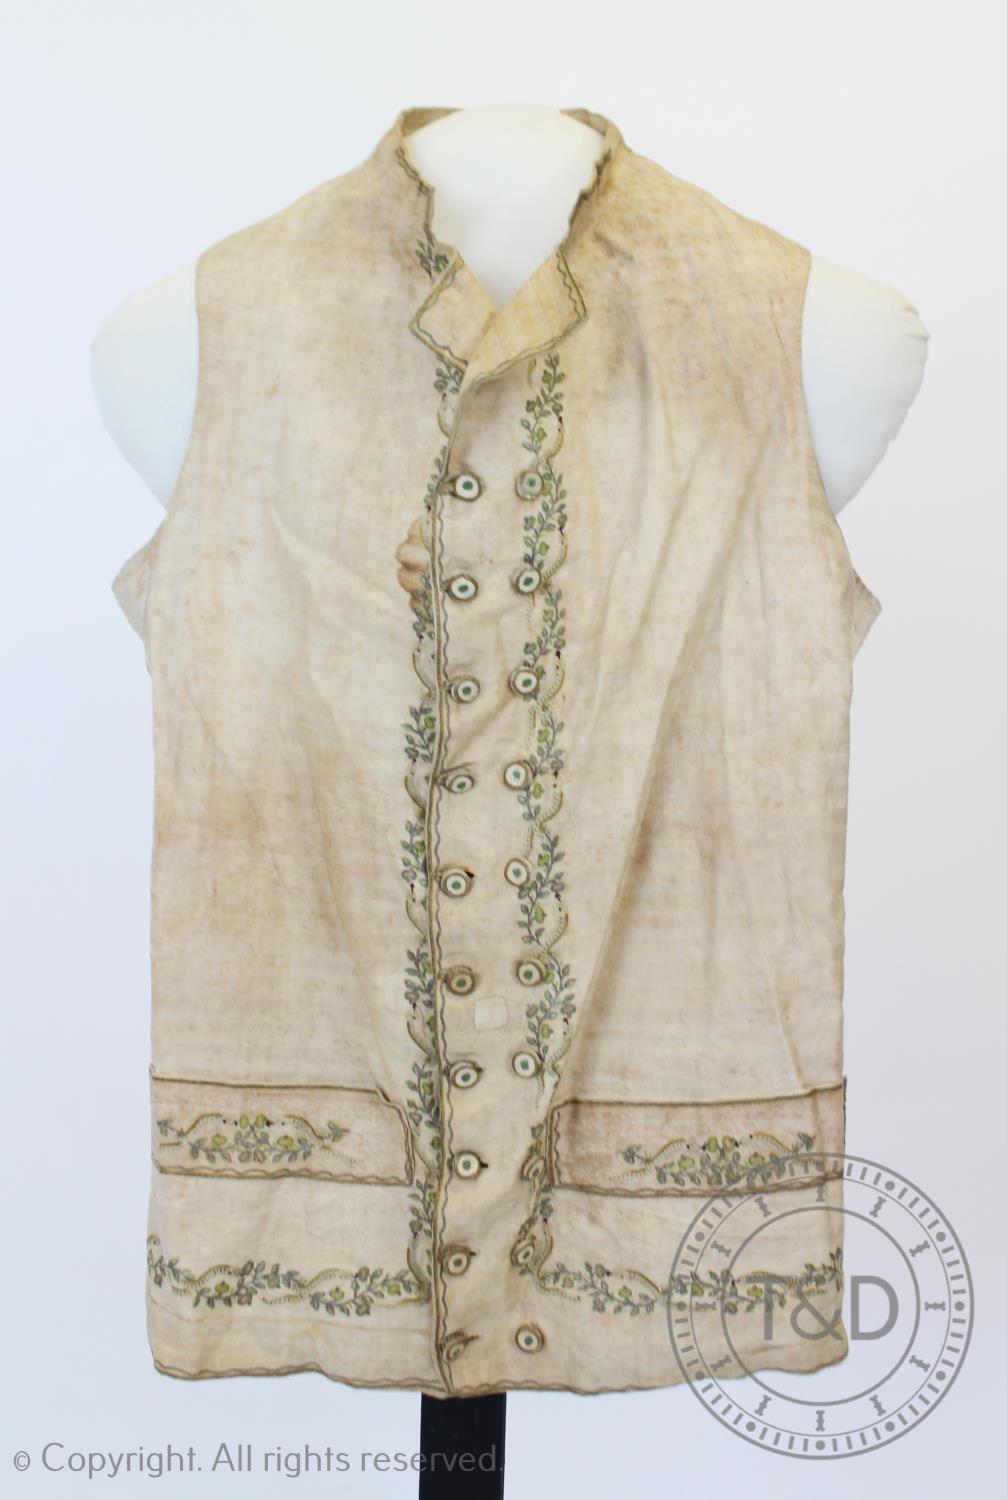 An ivory striped woven cotton waistcoat, circa 1800, the edges decorated with foliate sprays and